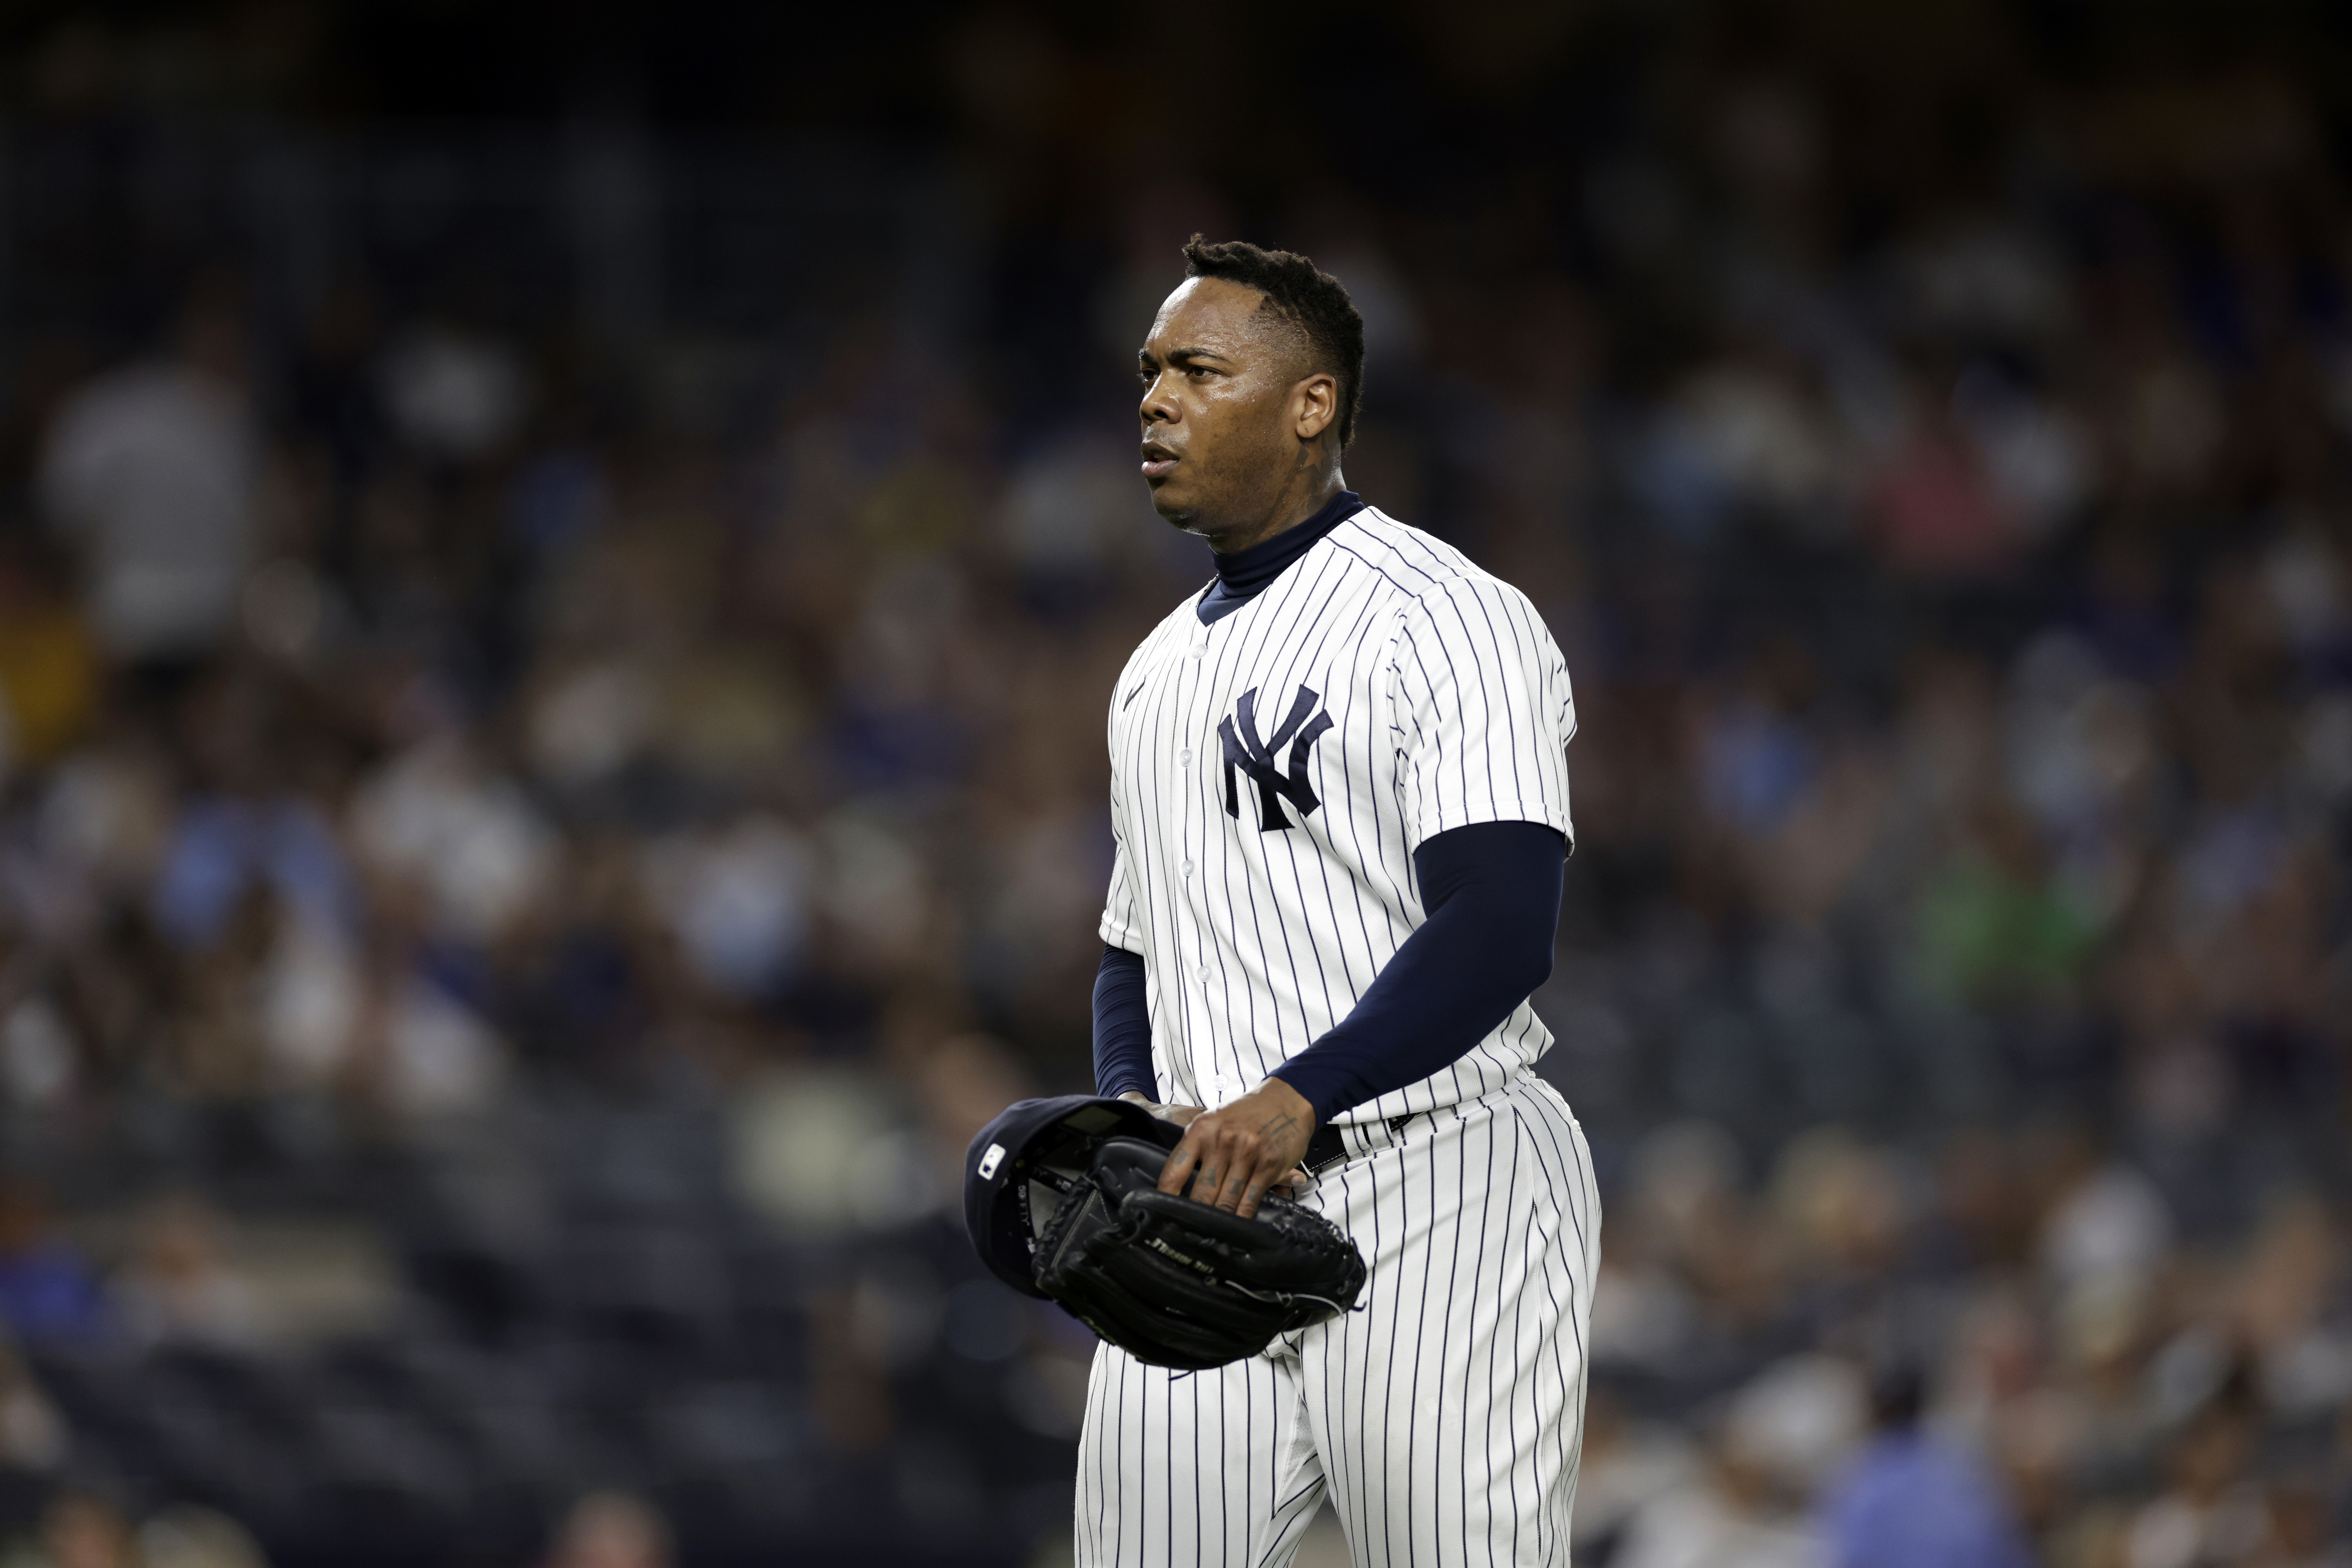 Infection from new tattoo lands Yanks' Aroldis Chapman on IL